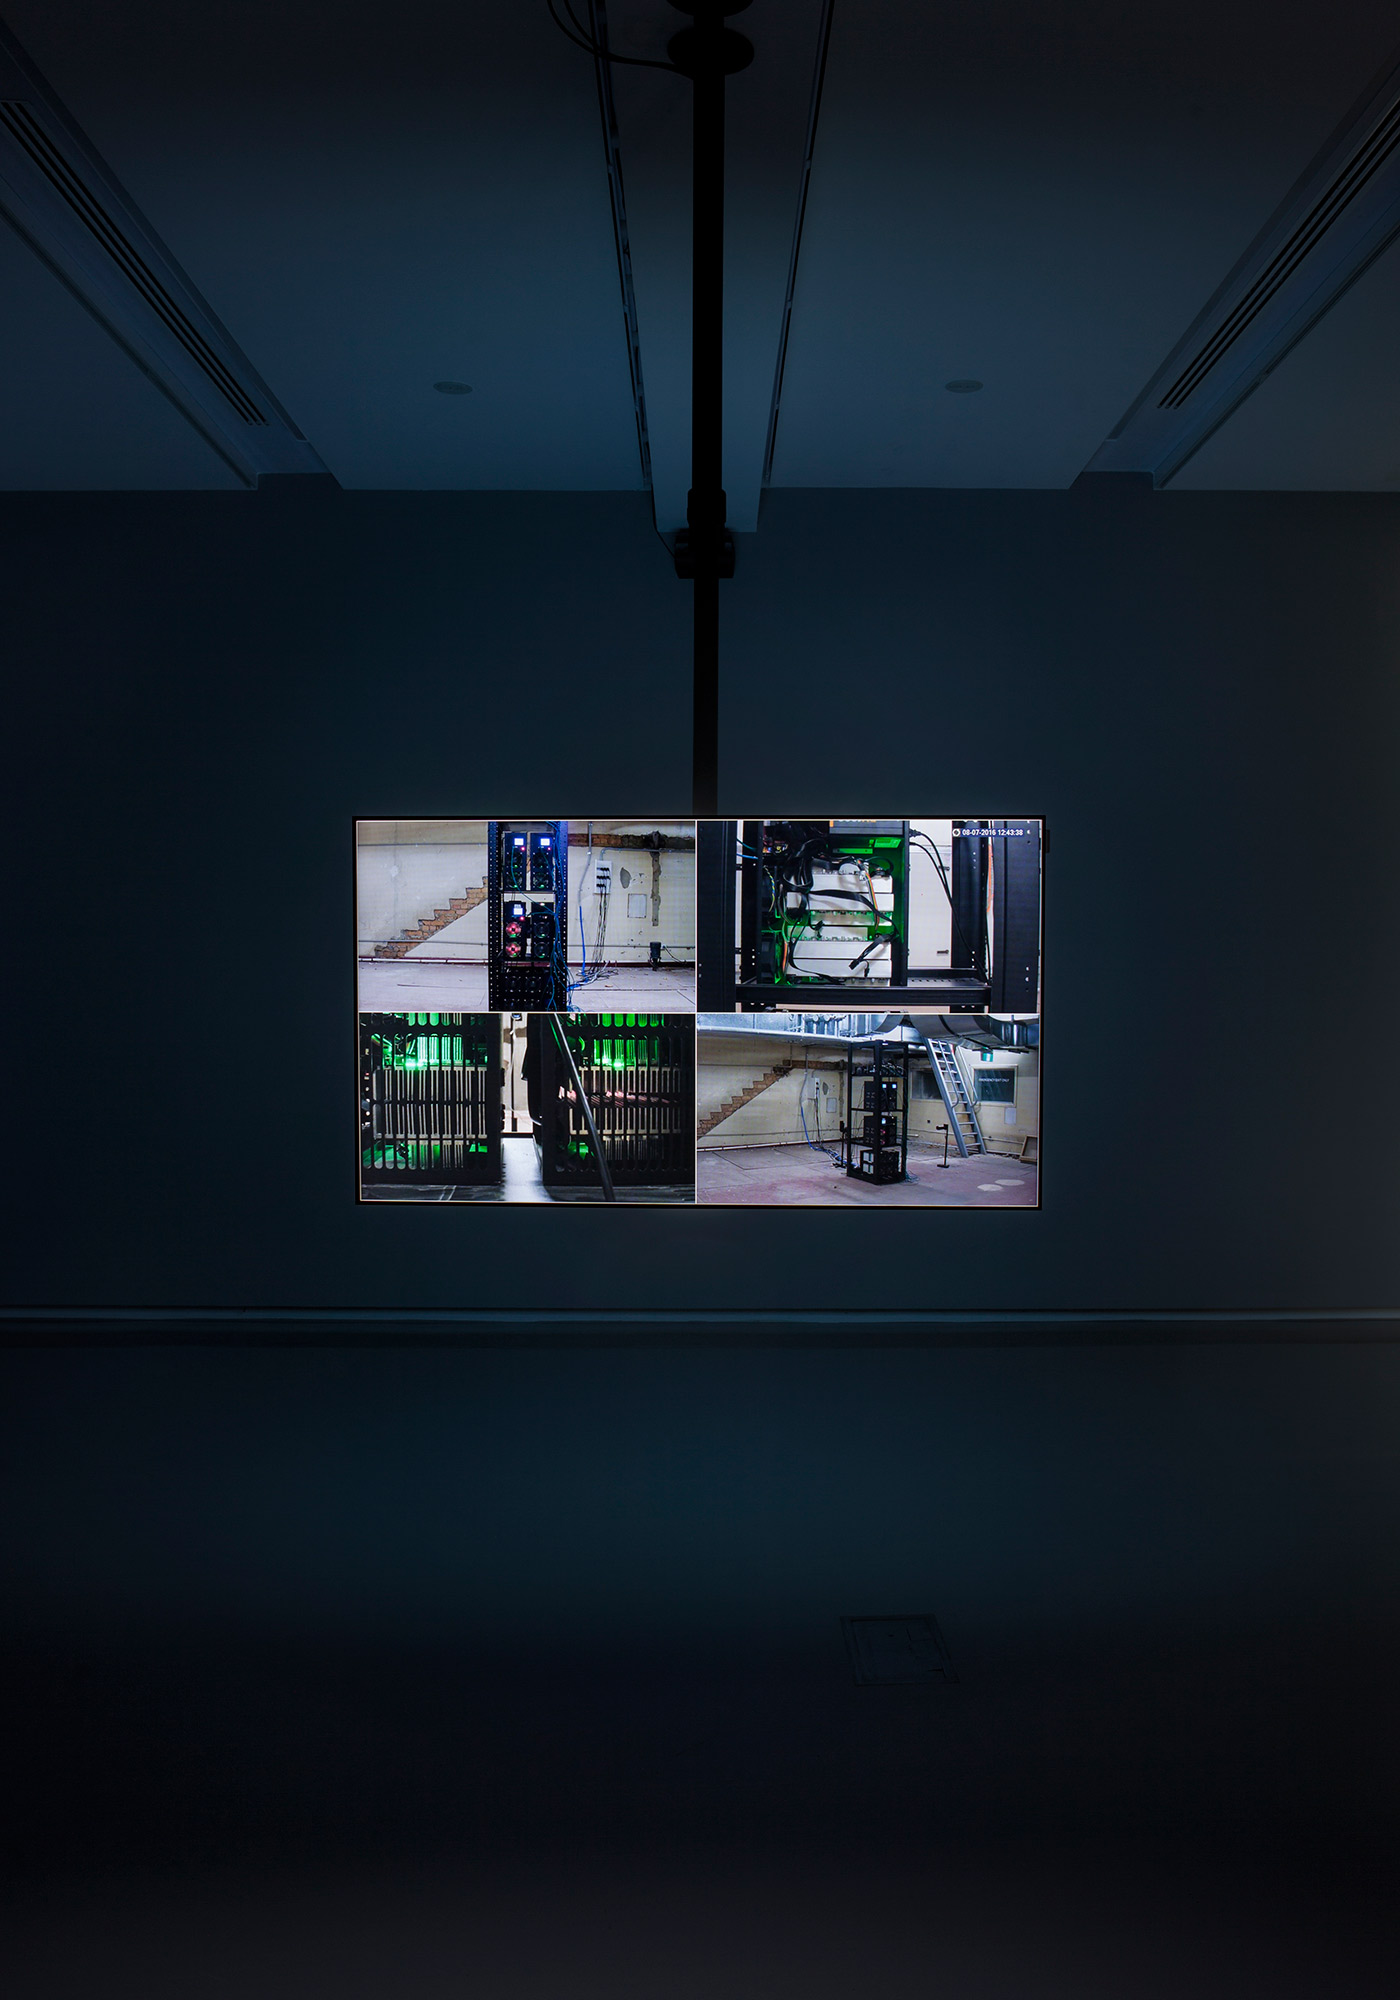 Nicholas Mangan, *Limits to Growth*, 2016, single channel HD video, sound, colour, 7:56, continuous loop. Installation view, Monash University Museum of Art, Melbourne, 2016. Photographer: Andrew Curtis.